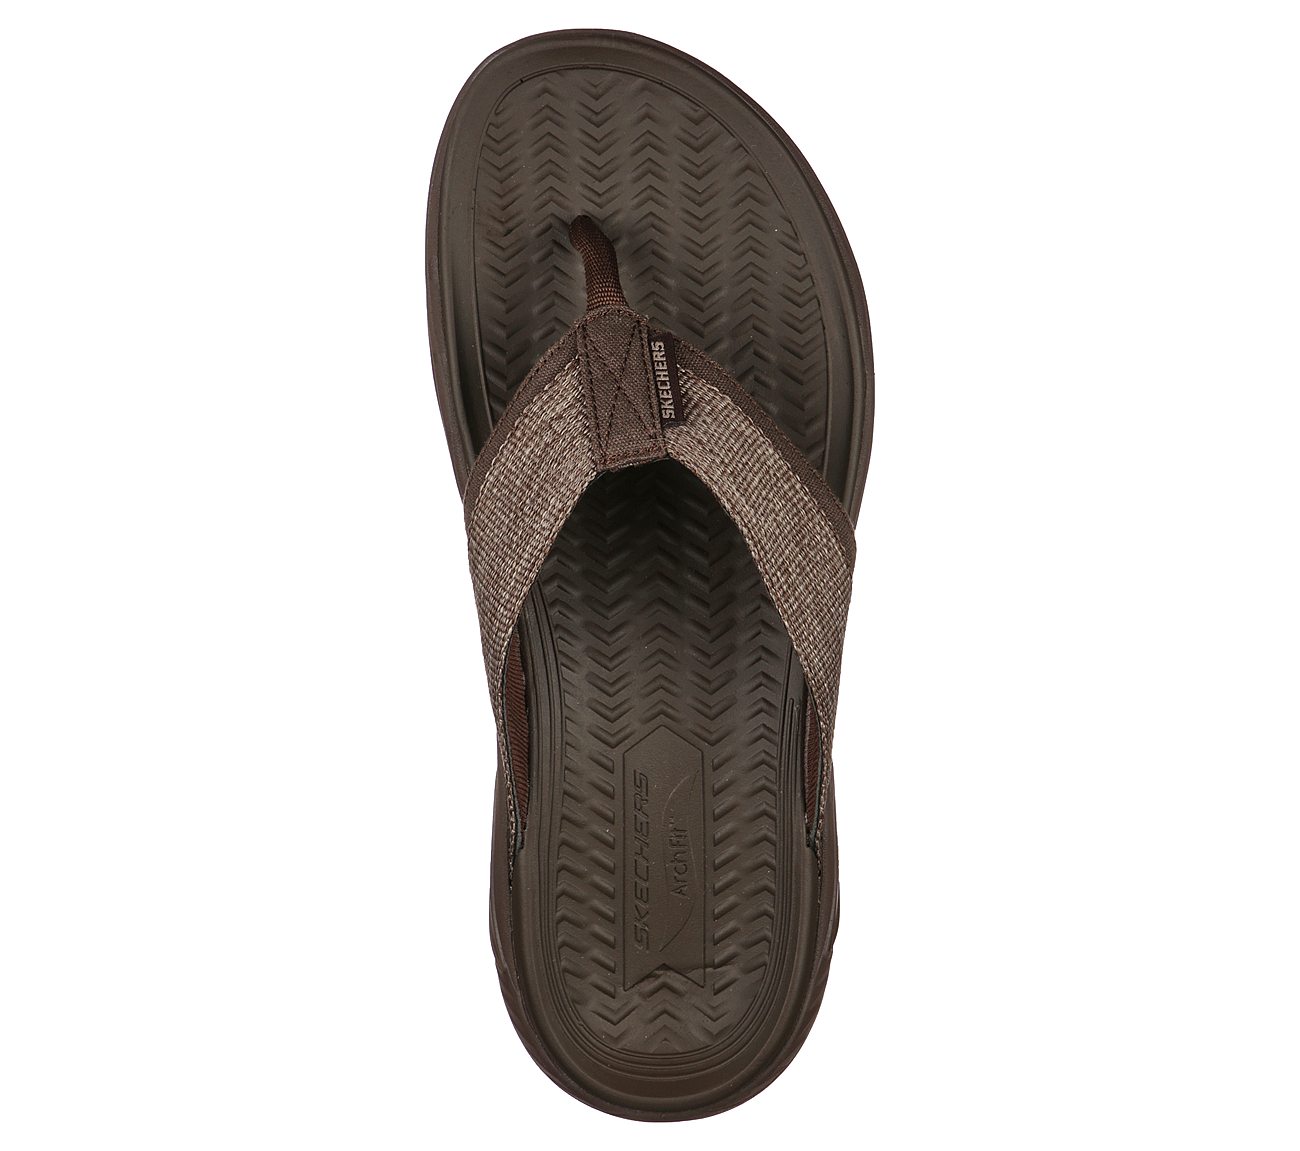 ARCH FIT MOTLEY SD - DOLANO, CCHOCOLATE Footwear Top View